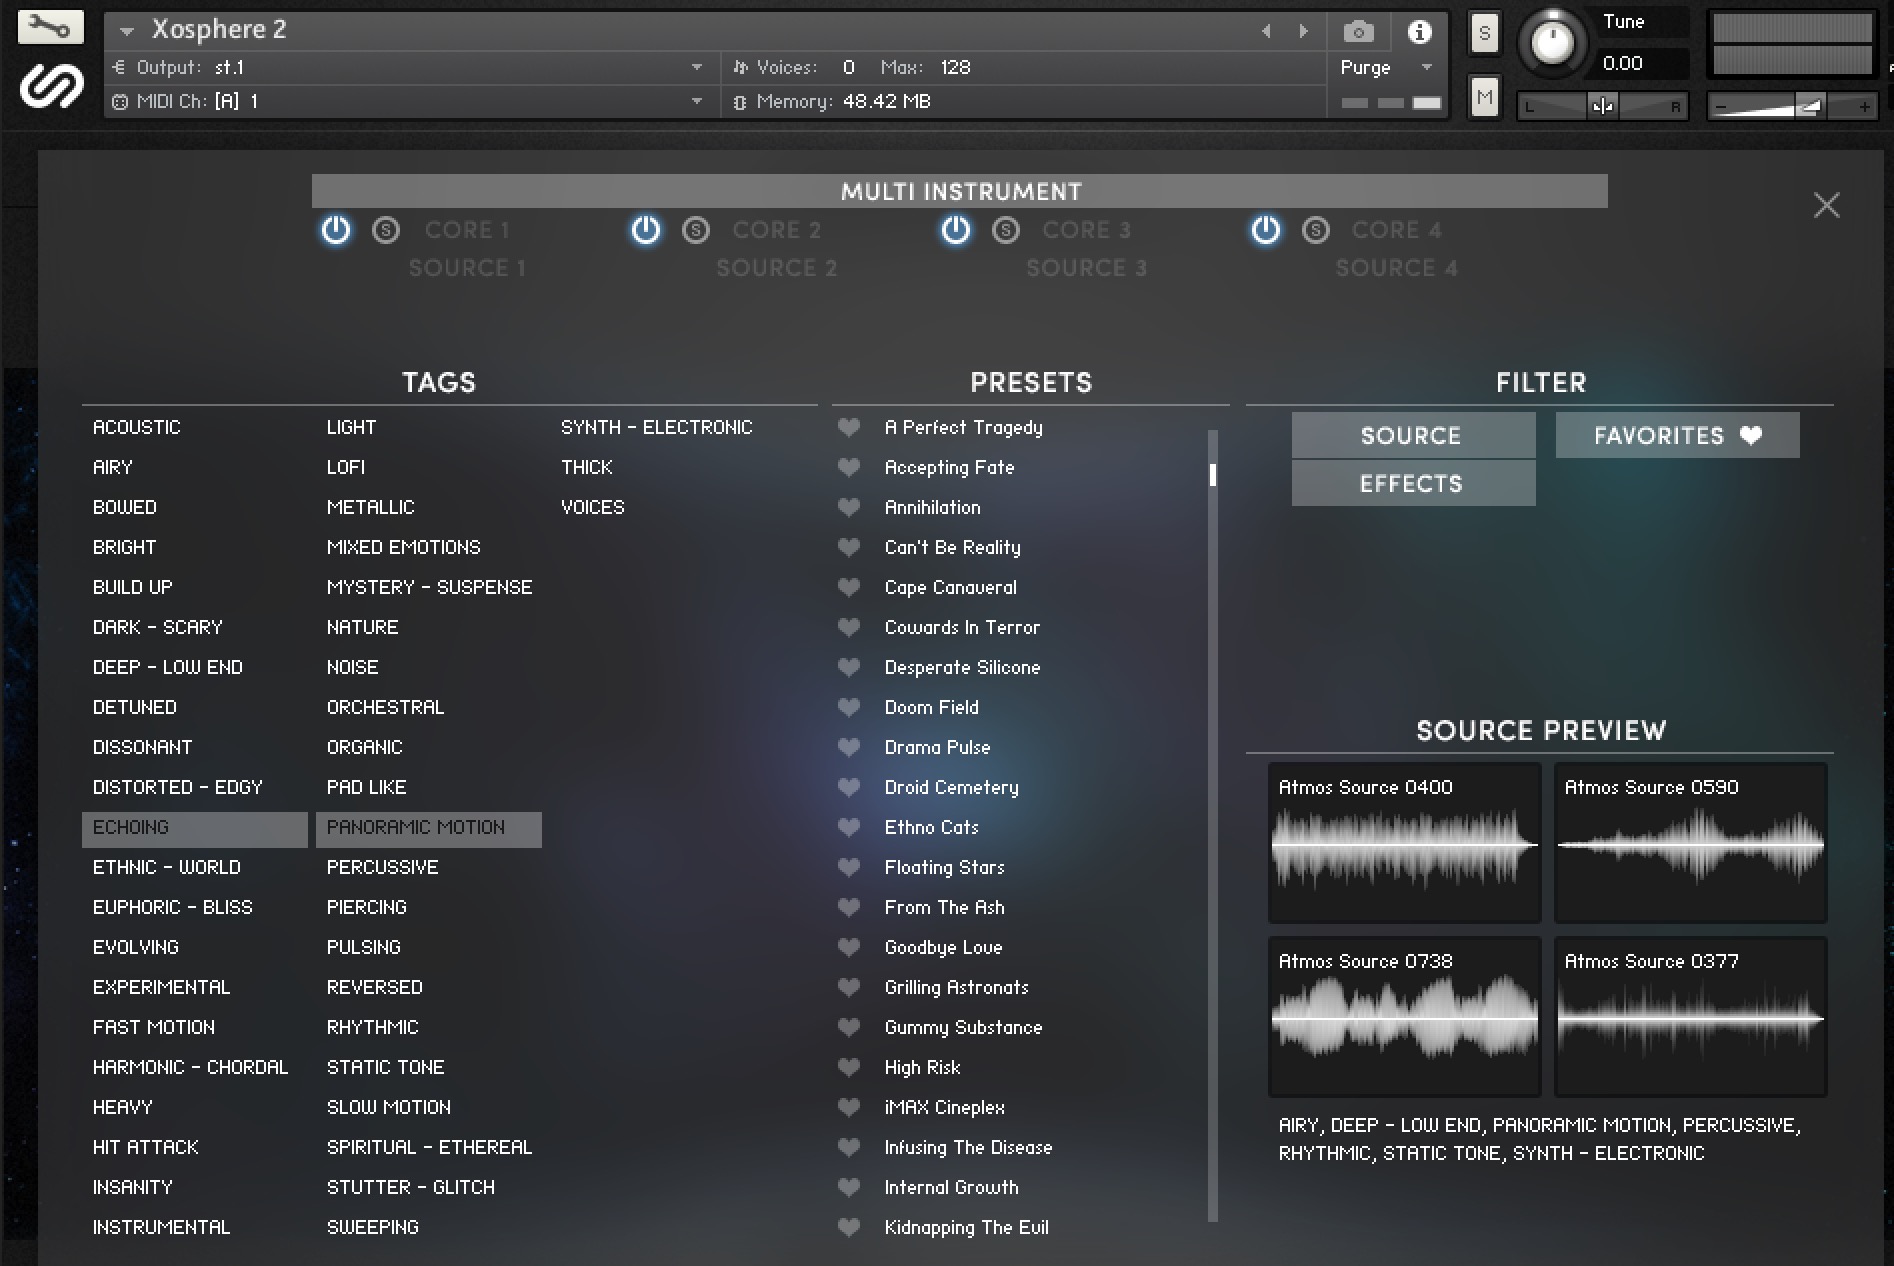 XOSPHERE 2 An Most Creative Atmosphere Engine by Sample Logic Review Browser